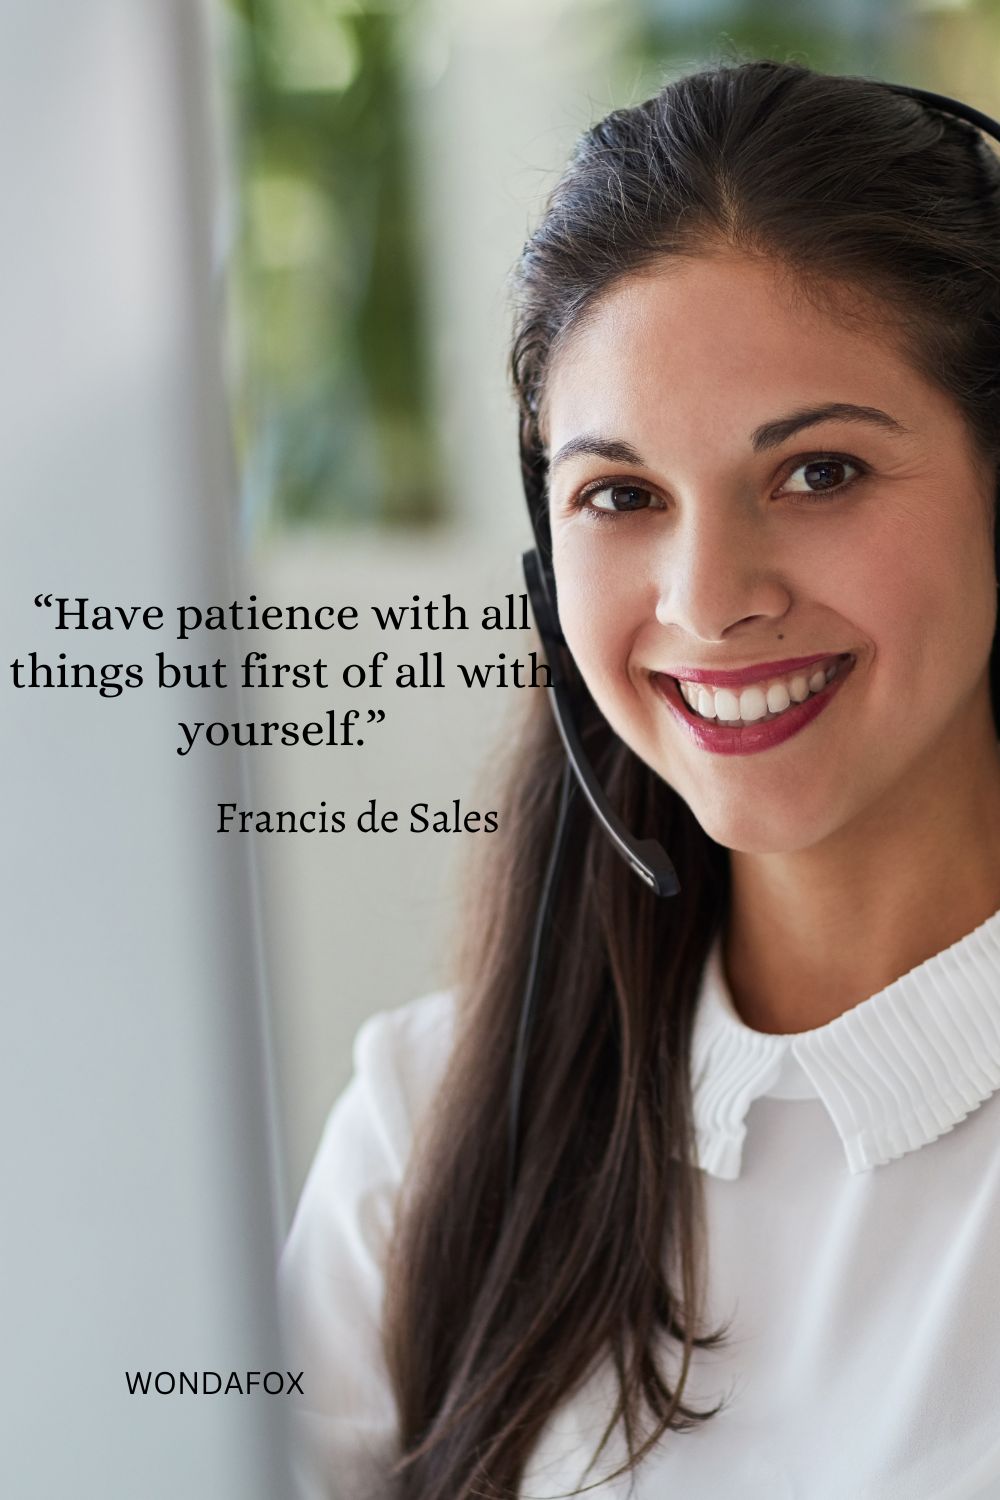 “Have patience with all things but first of all with yourself.”
Francis de Sales